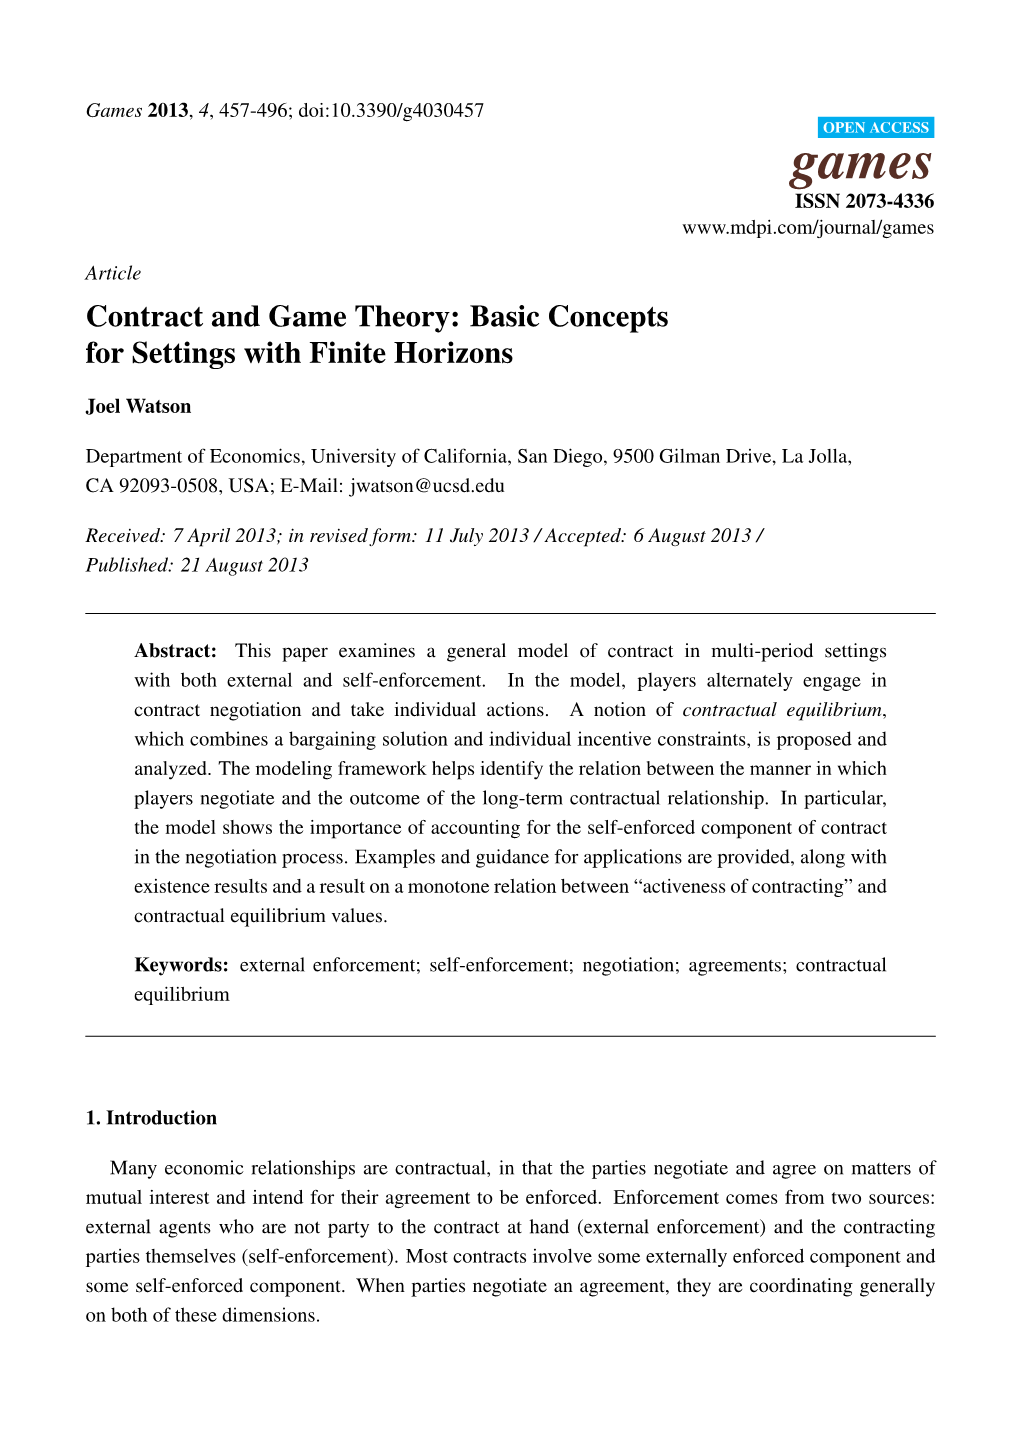 Contract and Game Theory: Basic Concepts for Settings with Finite Horizons